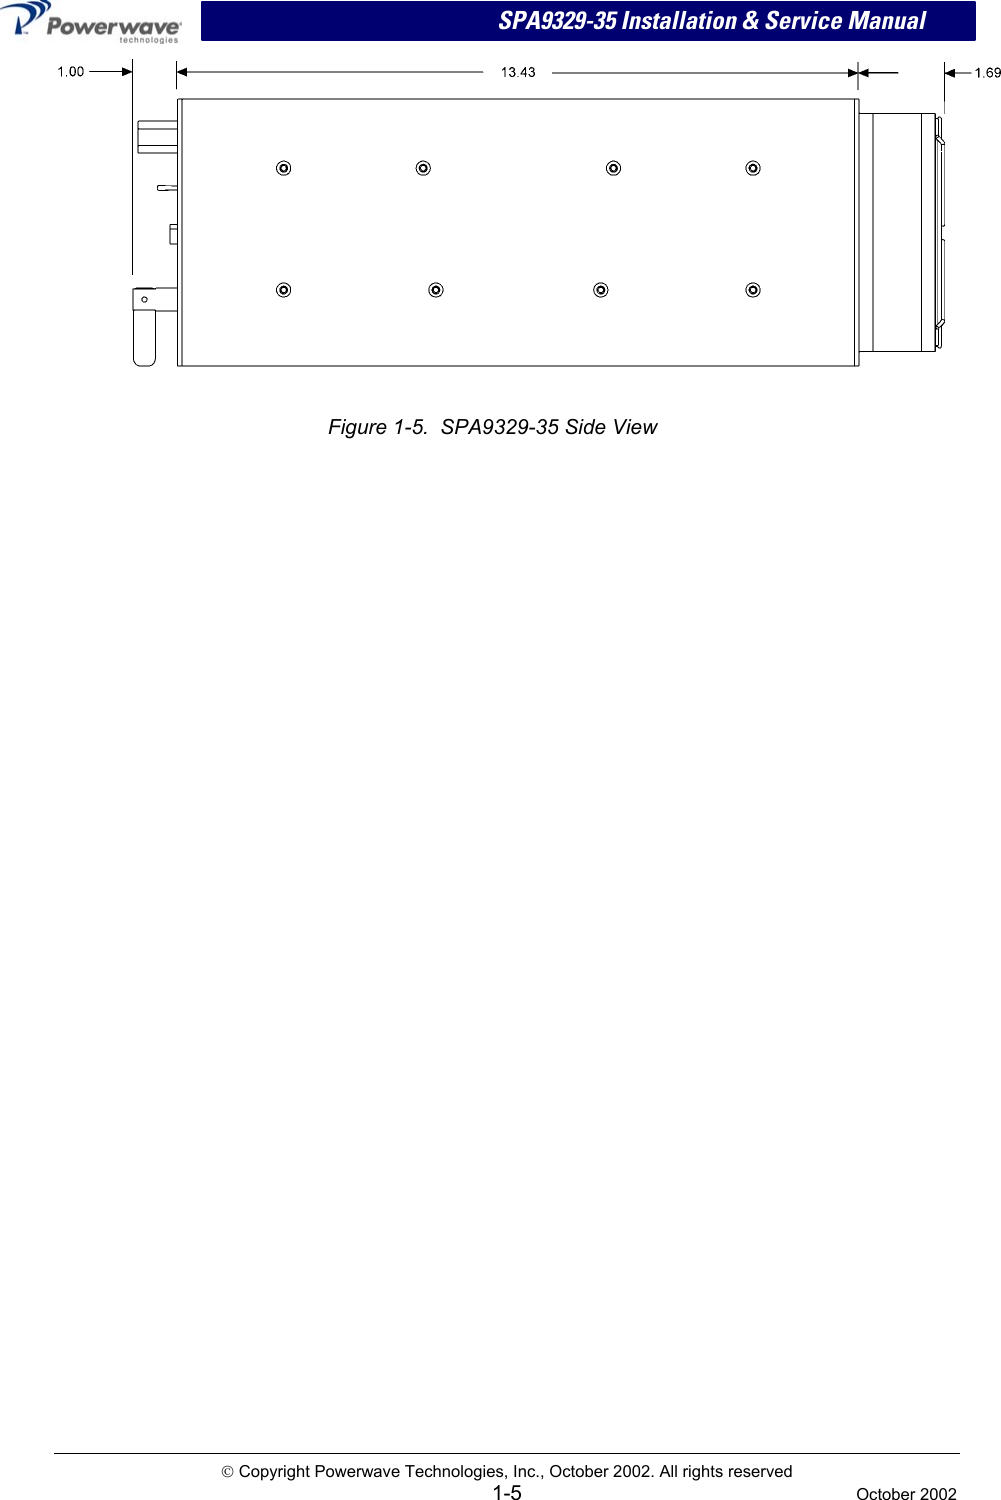  SPA9329-35 Installation &amp; Service Manual   Figure 1-5.  SPA9329-35 Side View  Copyright Powerwave Technologies, Inc., October 2002. All rights reserved  1-5  October 2002 